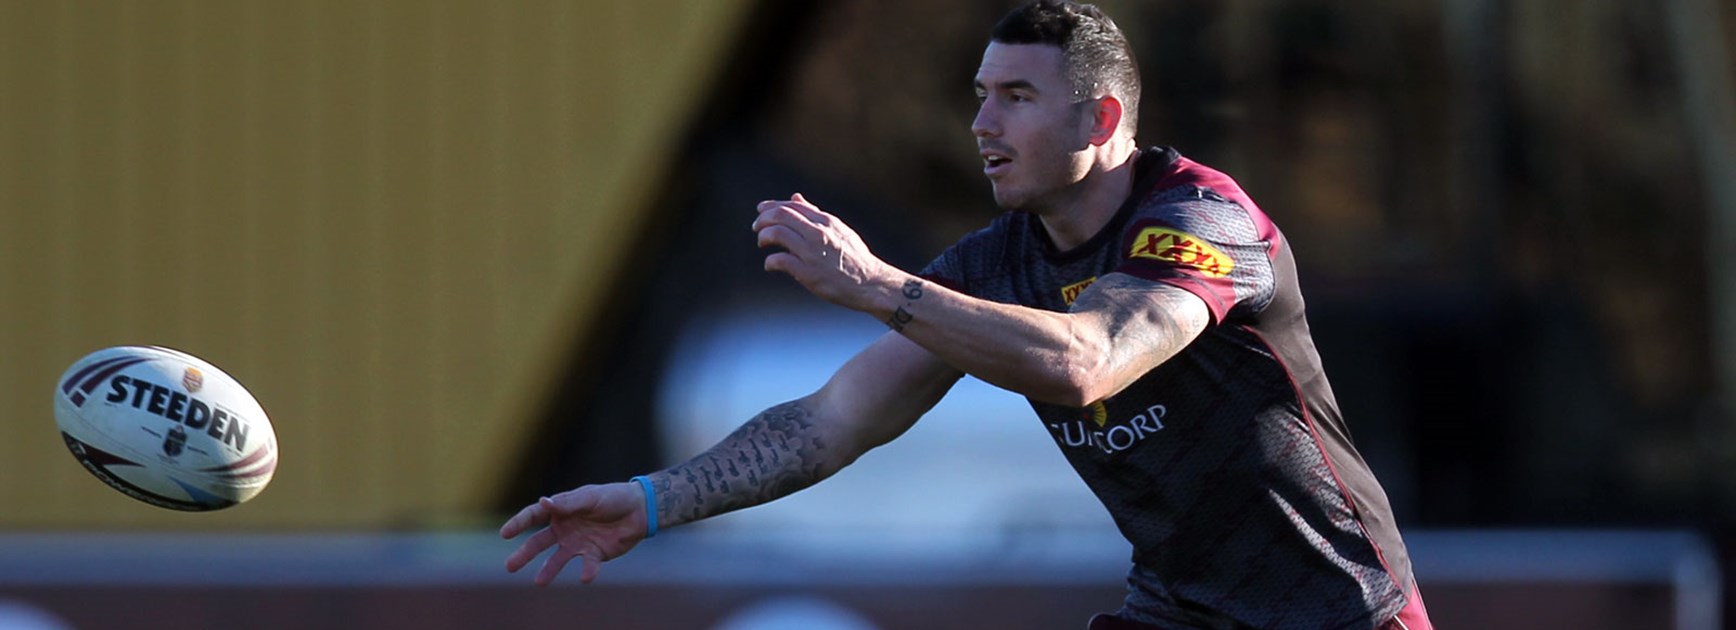 Queensland winger Darius Boyd trains in the leap up to Origin II at the MCG.